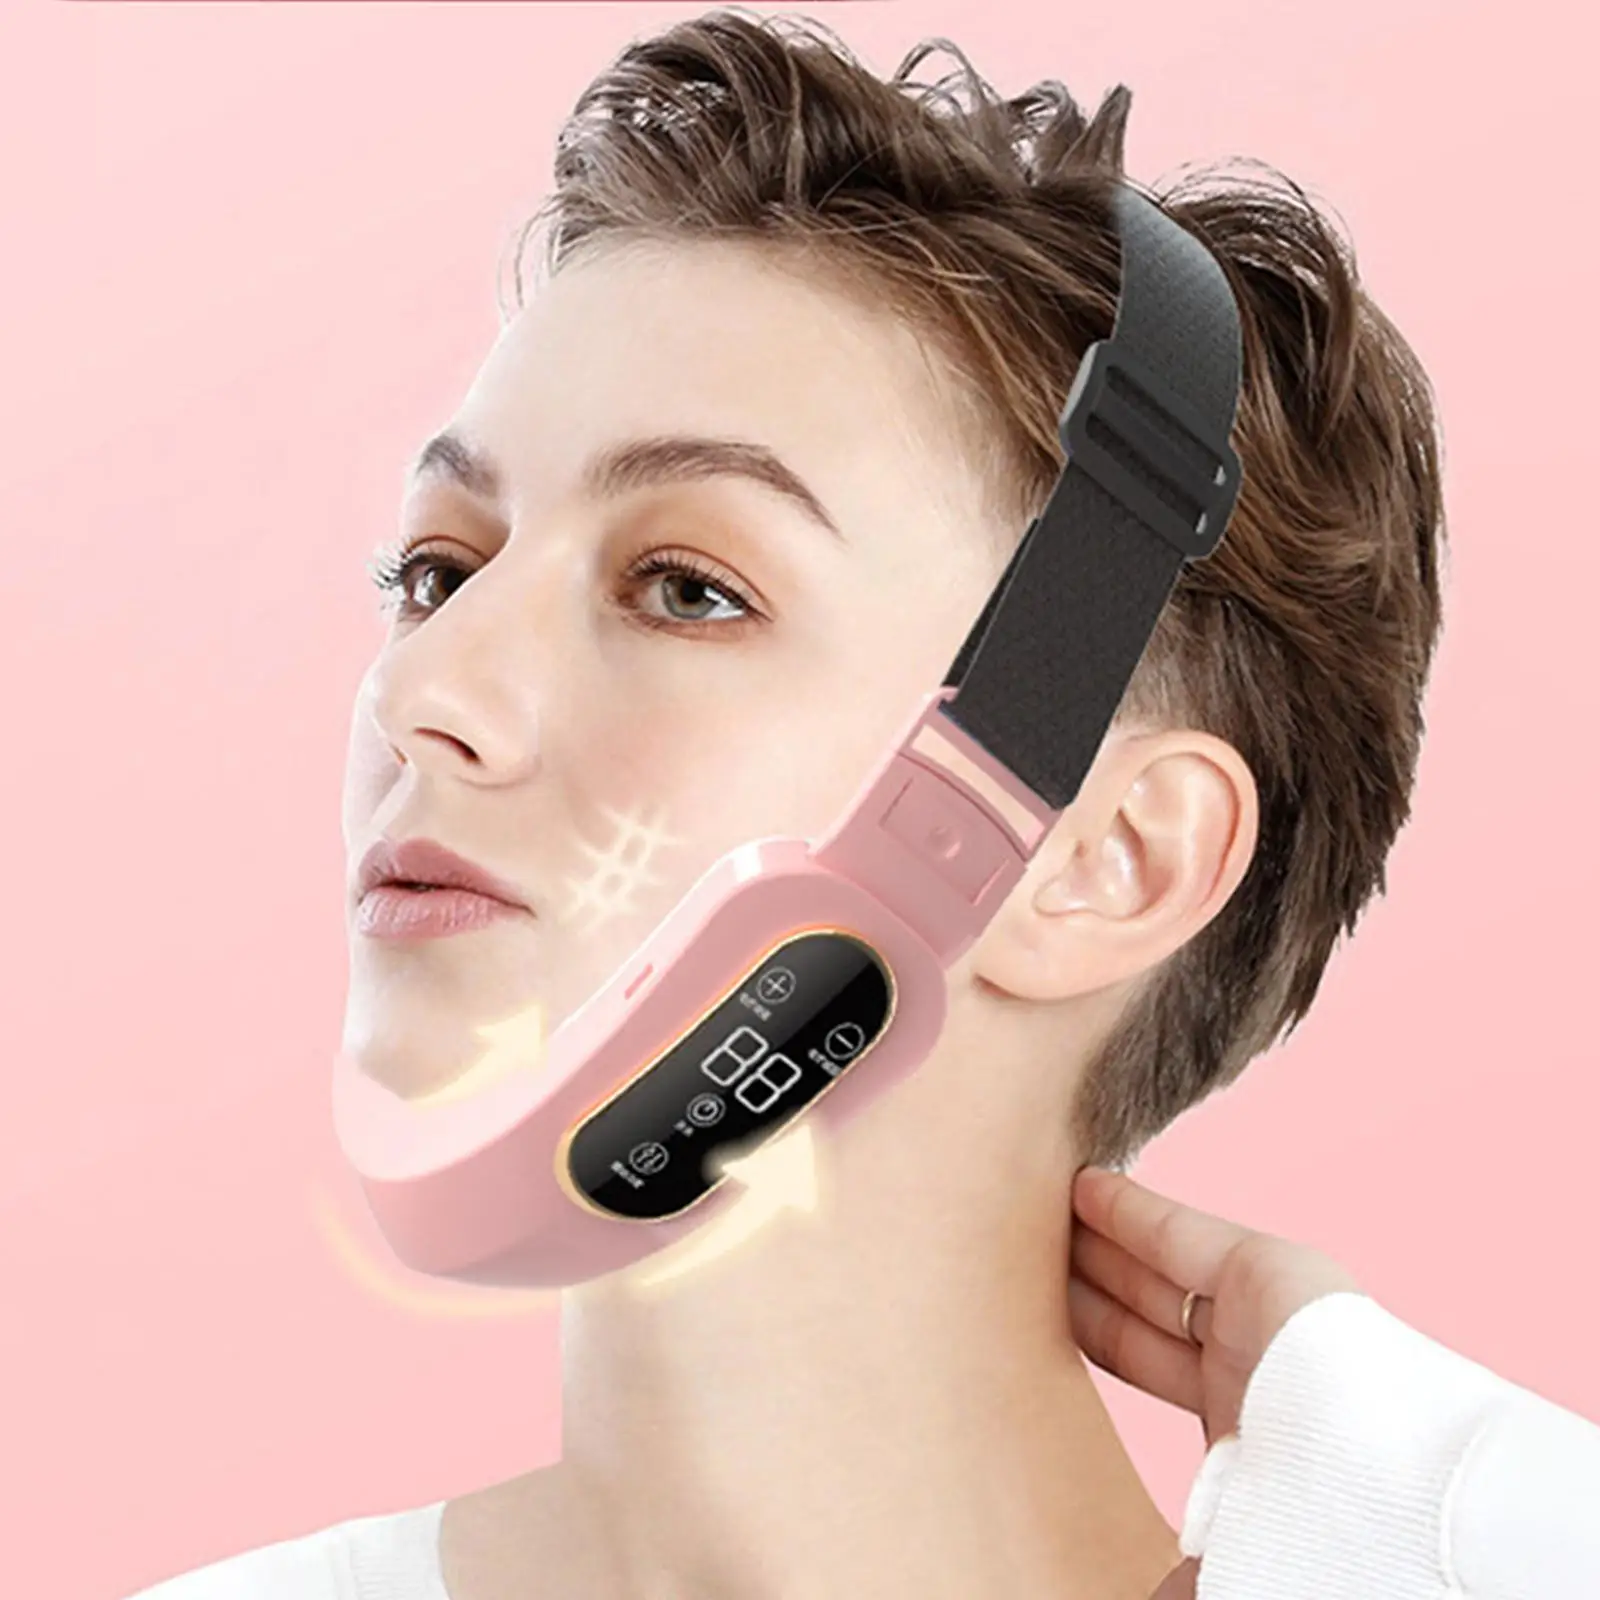 V Face Machine Beauty Device Painless Portable Electric Face Slimming Strap V Line up Lift Belt for Double Chin Removal Firming